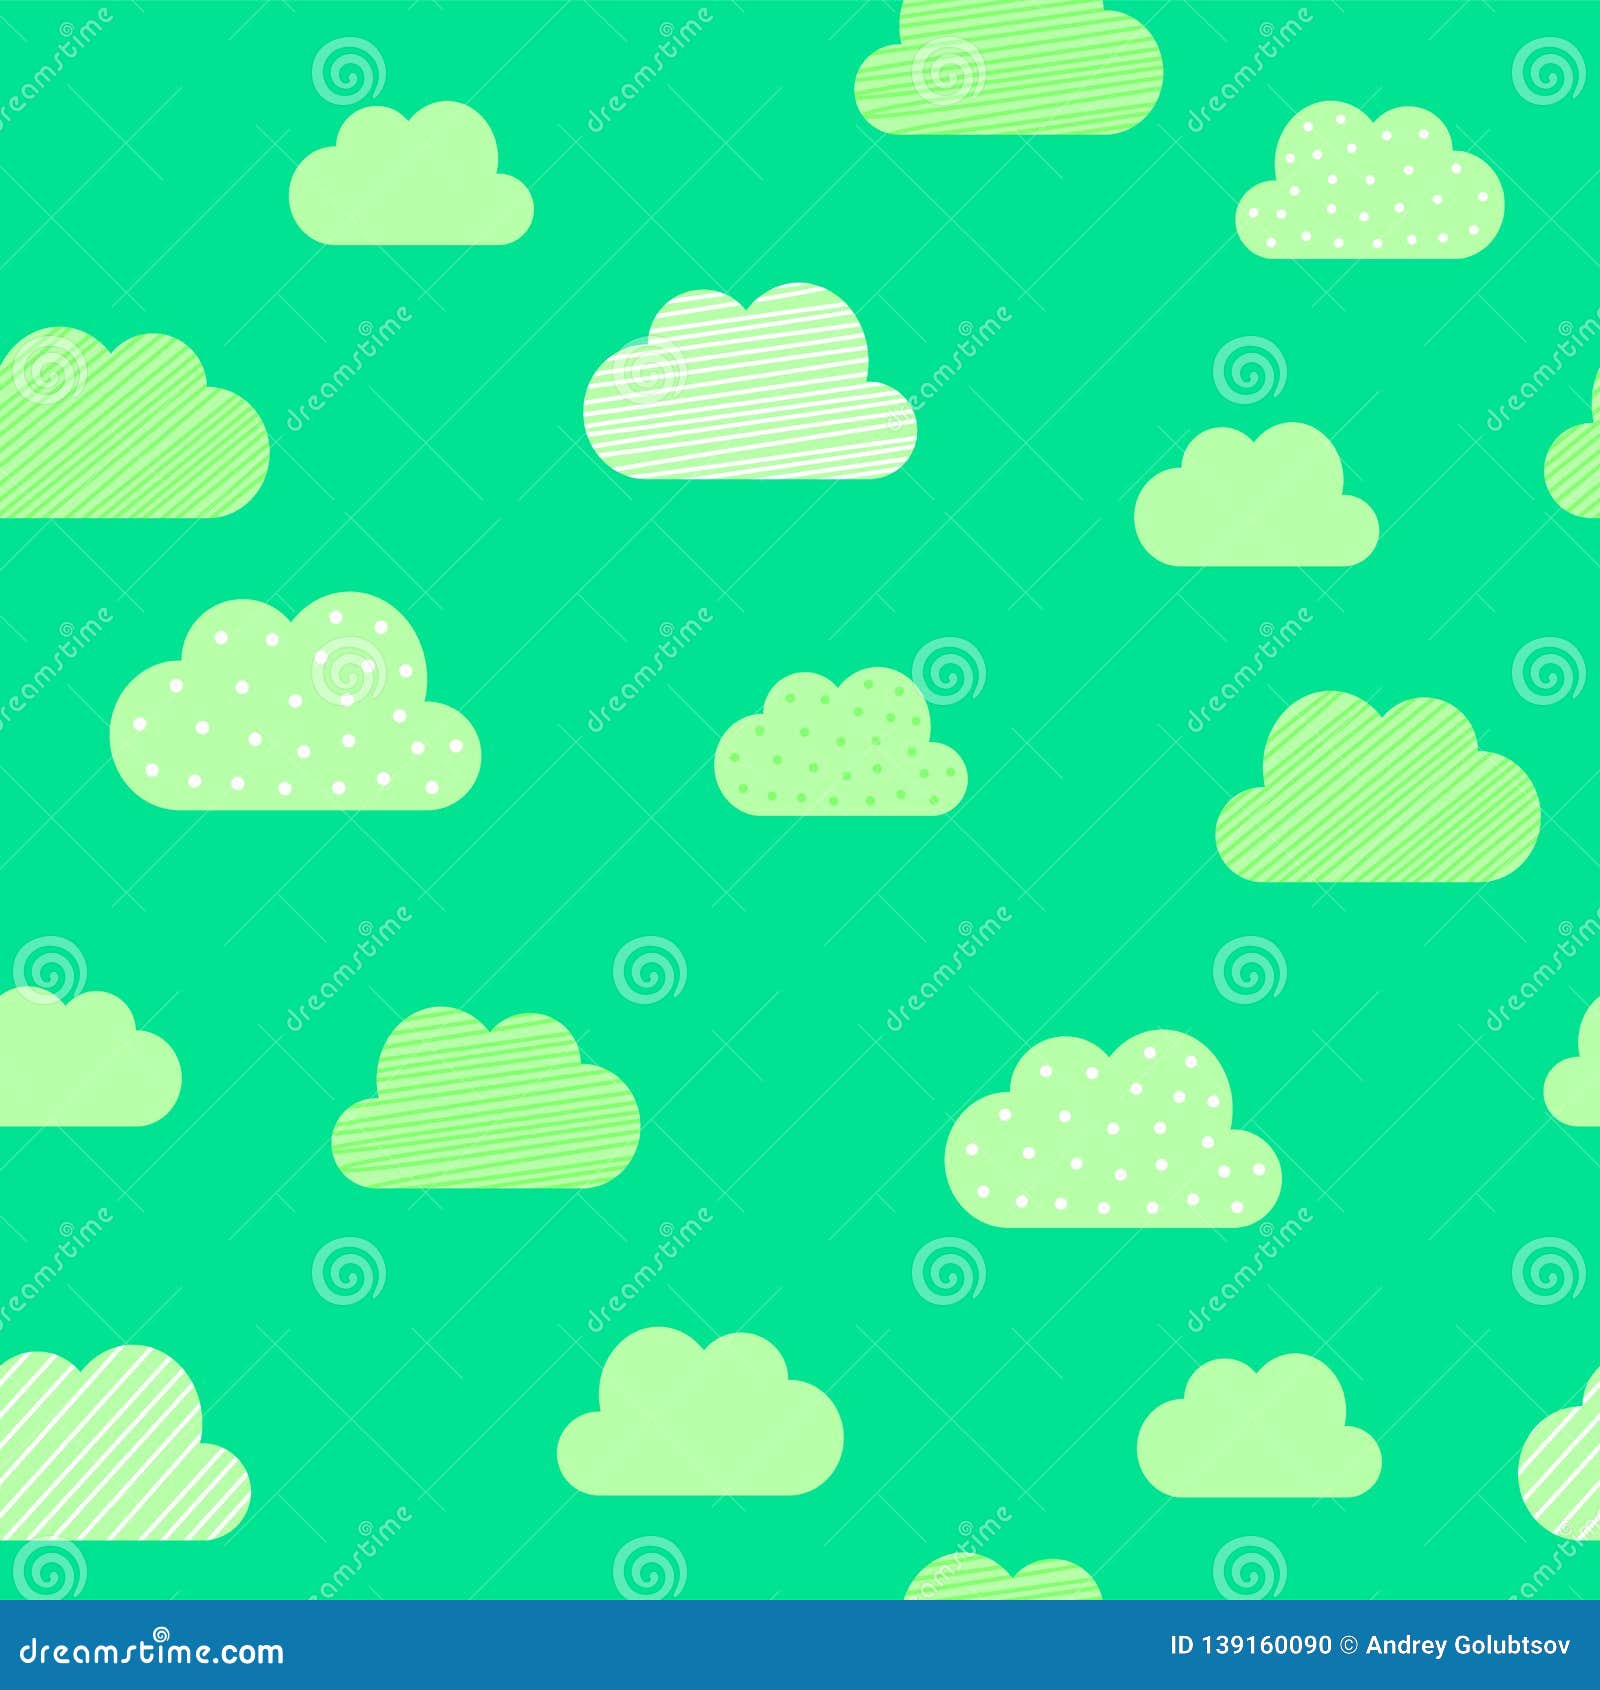 Clouds Cartoon Pattern Background. Vector Kid Birthday Greeting Card, Cloud  Pattern Green Background Stock Vector - Illustration of cloud, decoration:  139160090